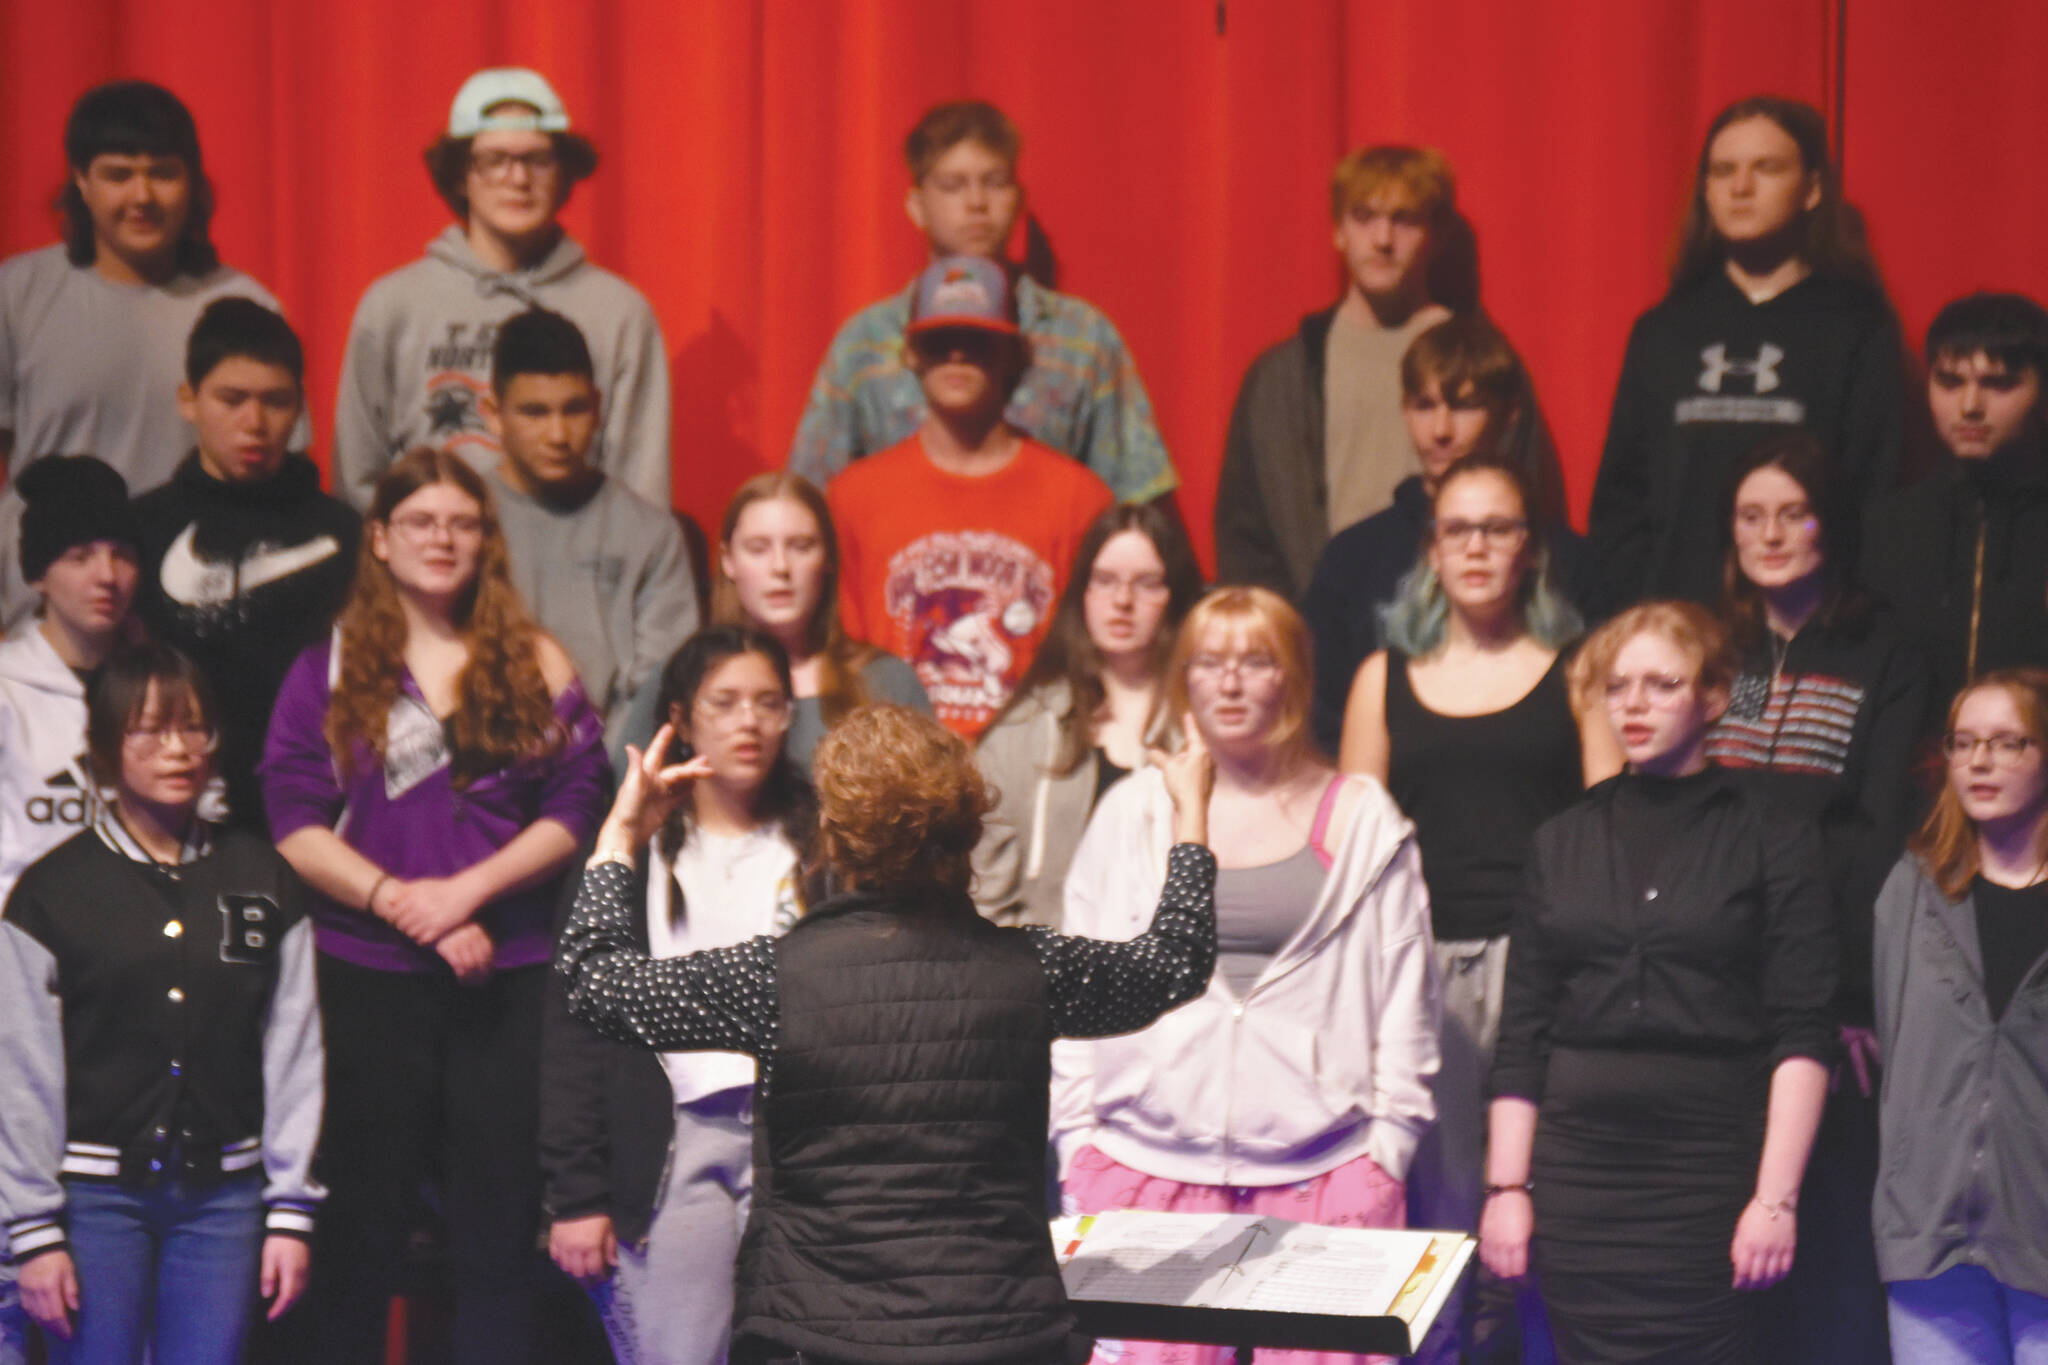 Audra Calloway directs the Soldotna High School Choir in a rehersal Oct. 11 at Soldotna High School. (Jake Dye/Peninsula Clarion)